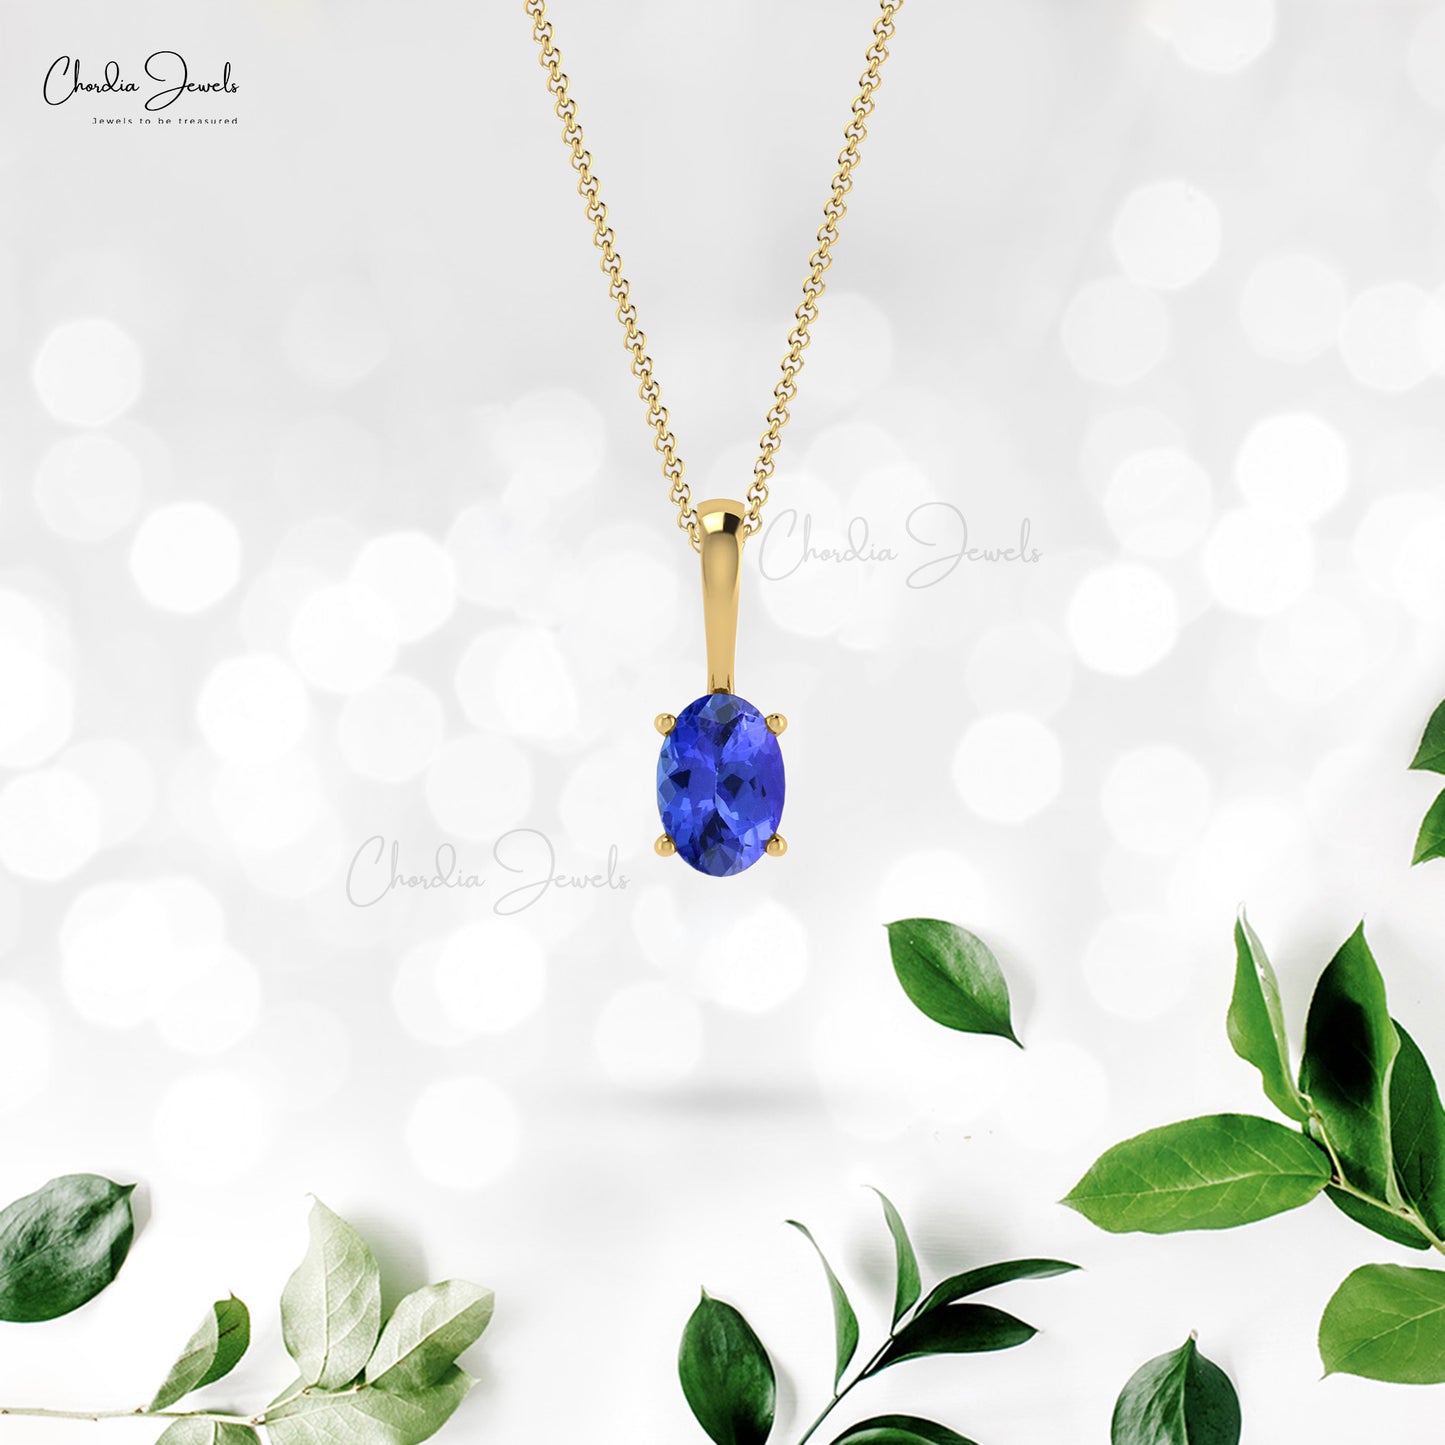 Natural Tanzanite Pendant 0.54Ct Oval Cut Handmade Pendant 14k Real Gold Hallmarked Jewelry Personalized Gift For Her